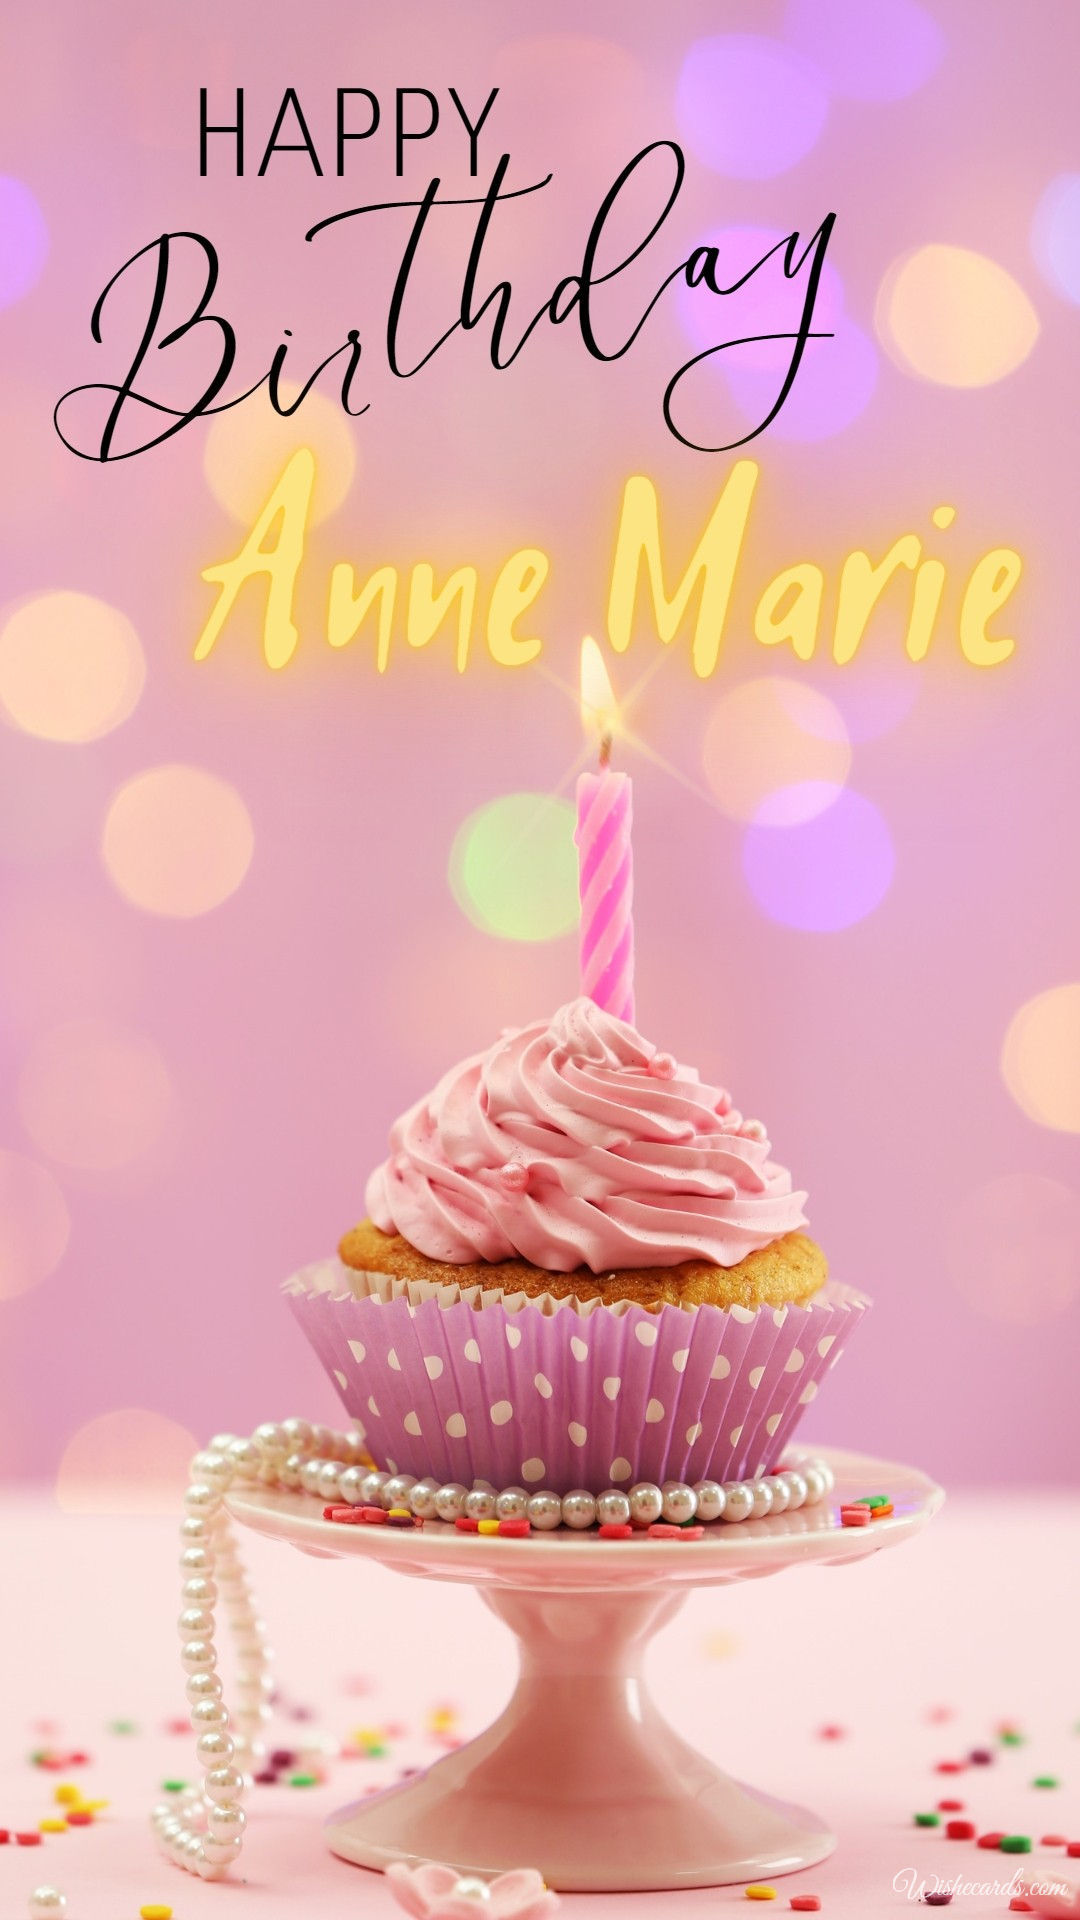 Happy Birthday Anne Marie Images and Funny Cards